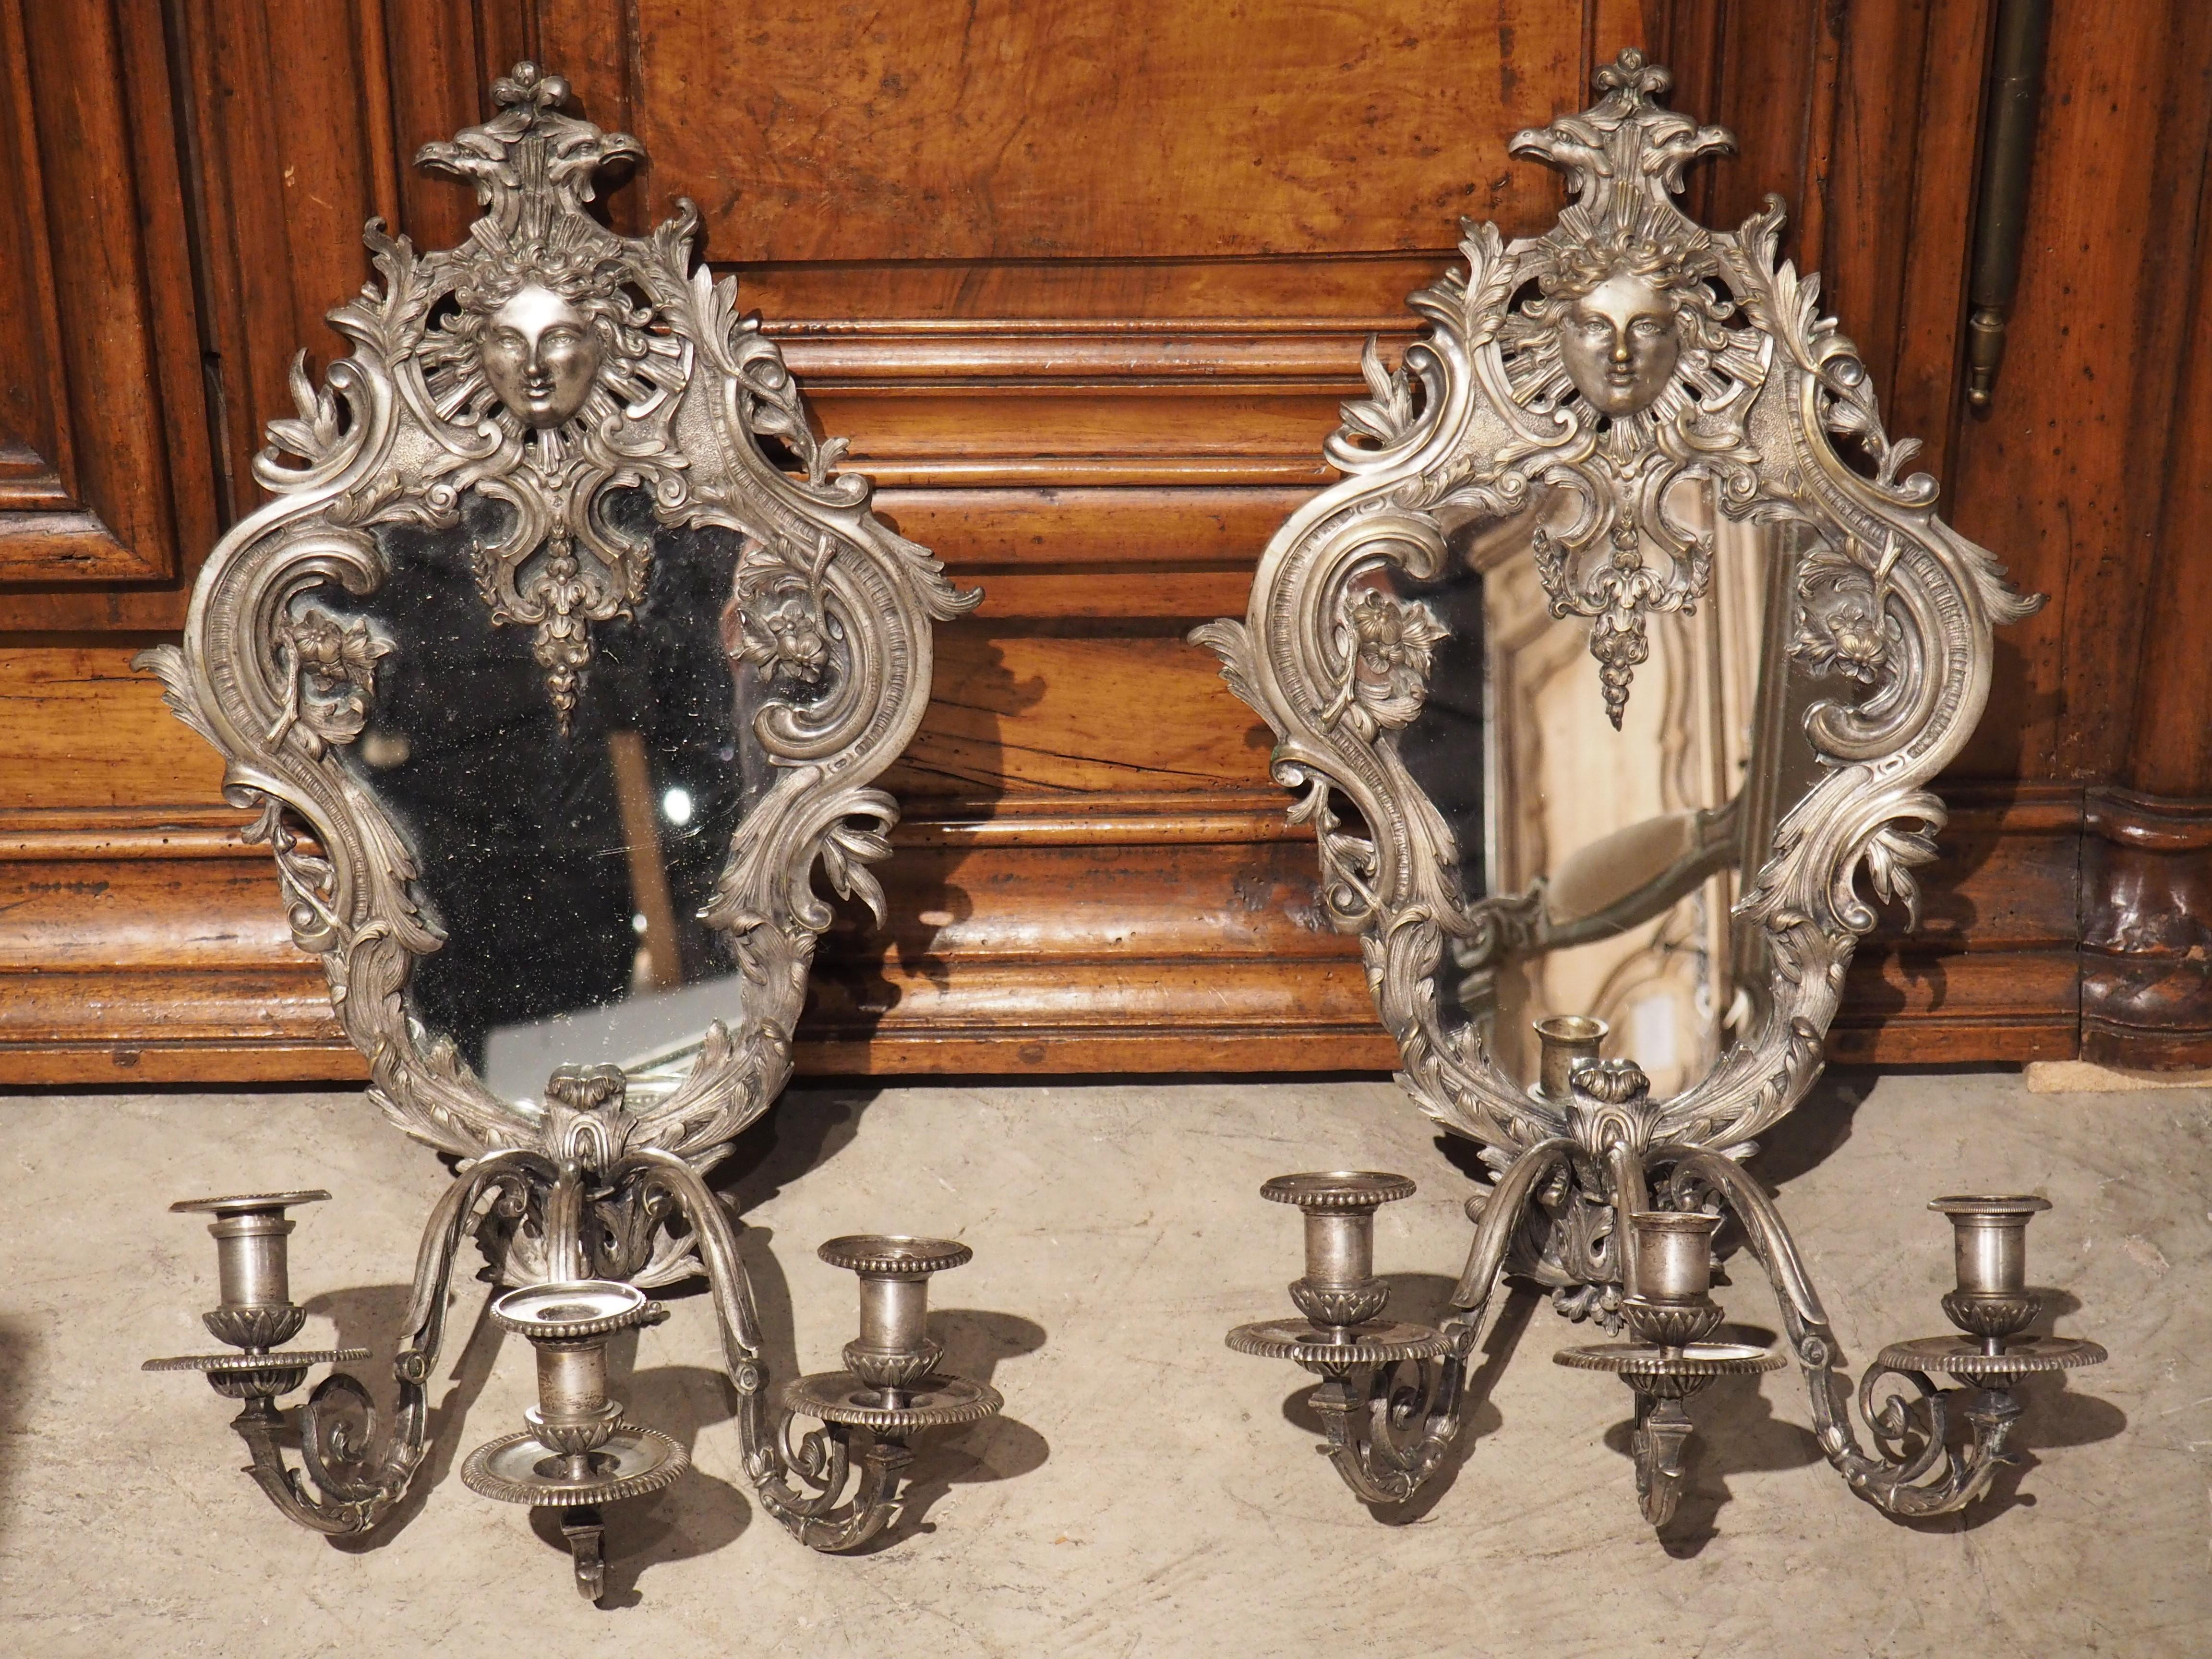 Period Napoleon III furnishings are typically very versatile items, due to the fact that they incorporate elements from preceding styles, allowing these “Second Empire” pieces to be paired with offerings from other regimes. In the case of this pair